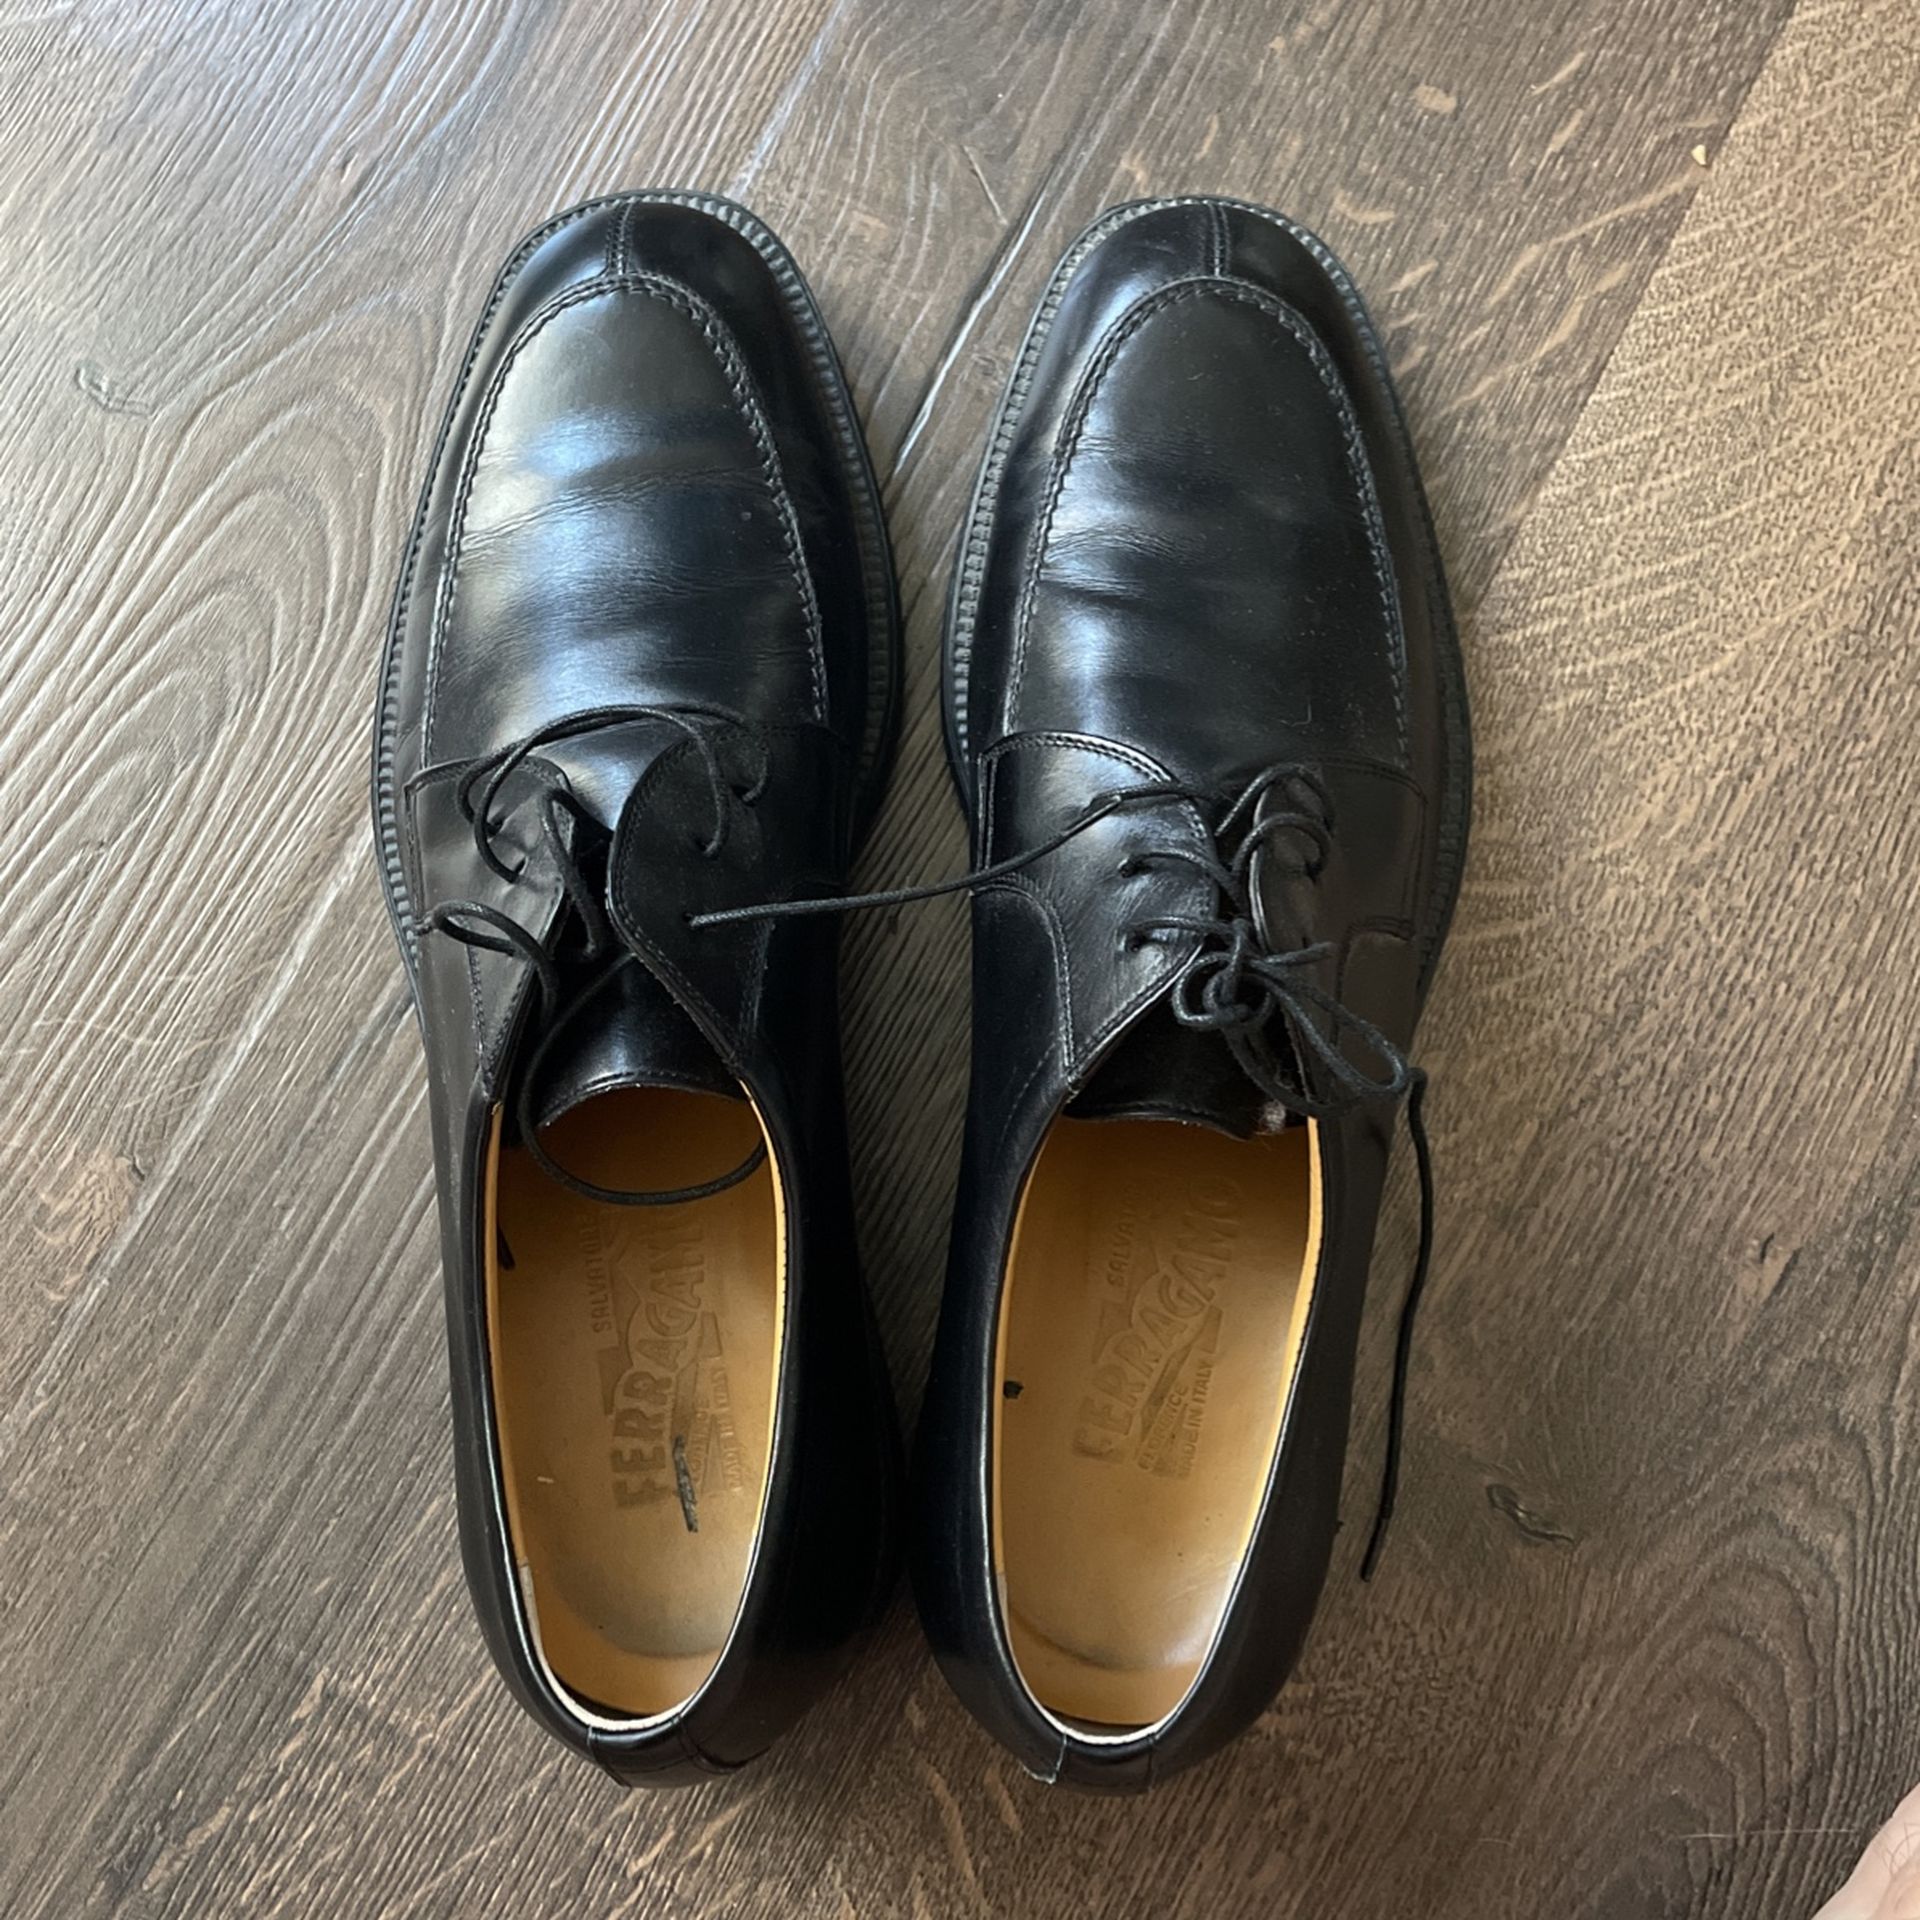 Salvatore Ferragamo Black Dress Shoes And Ted Baker Shoes